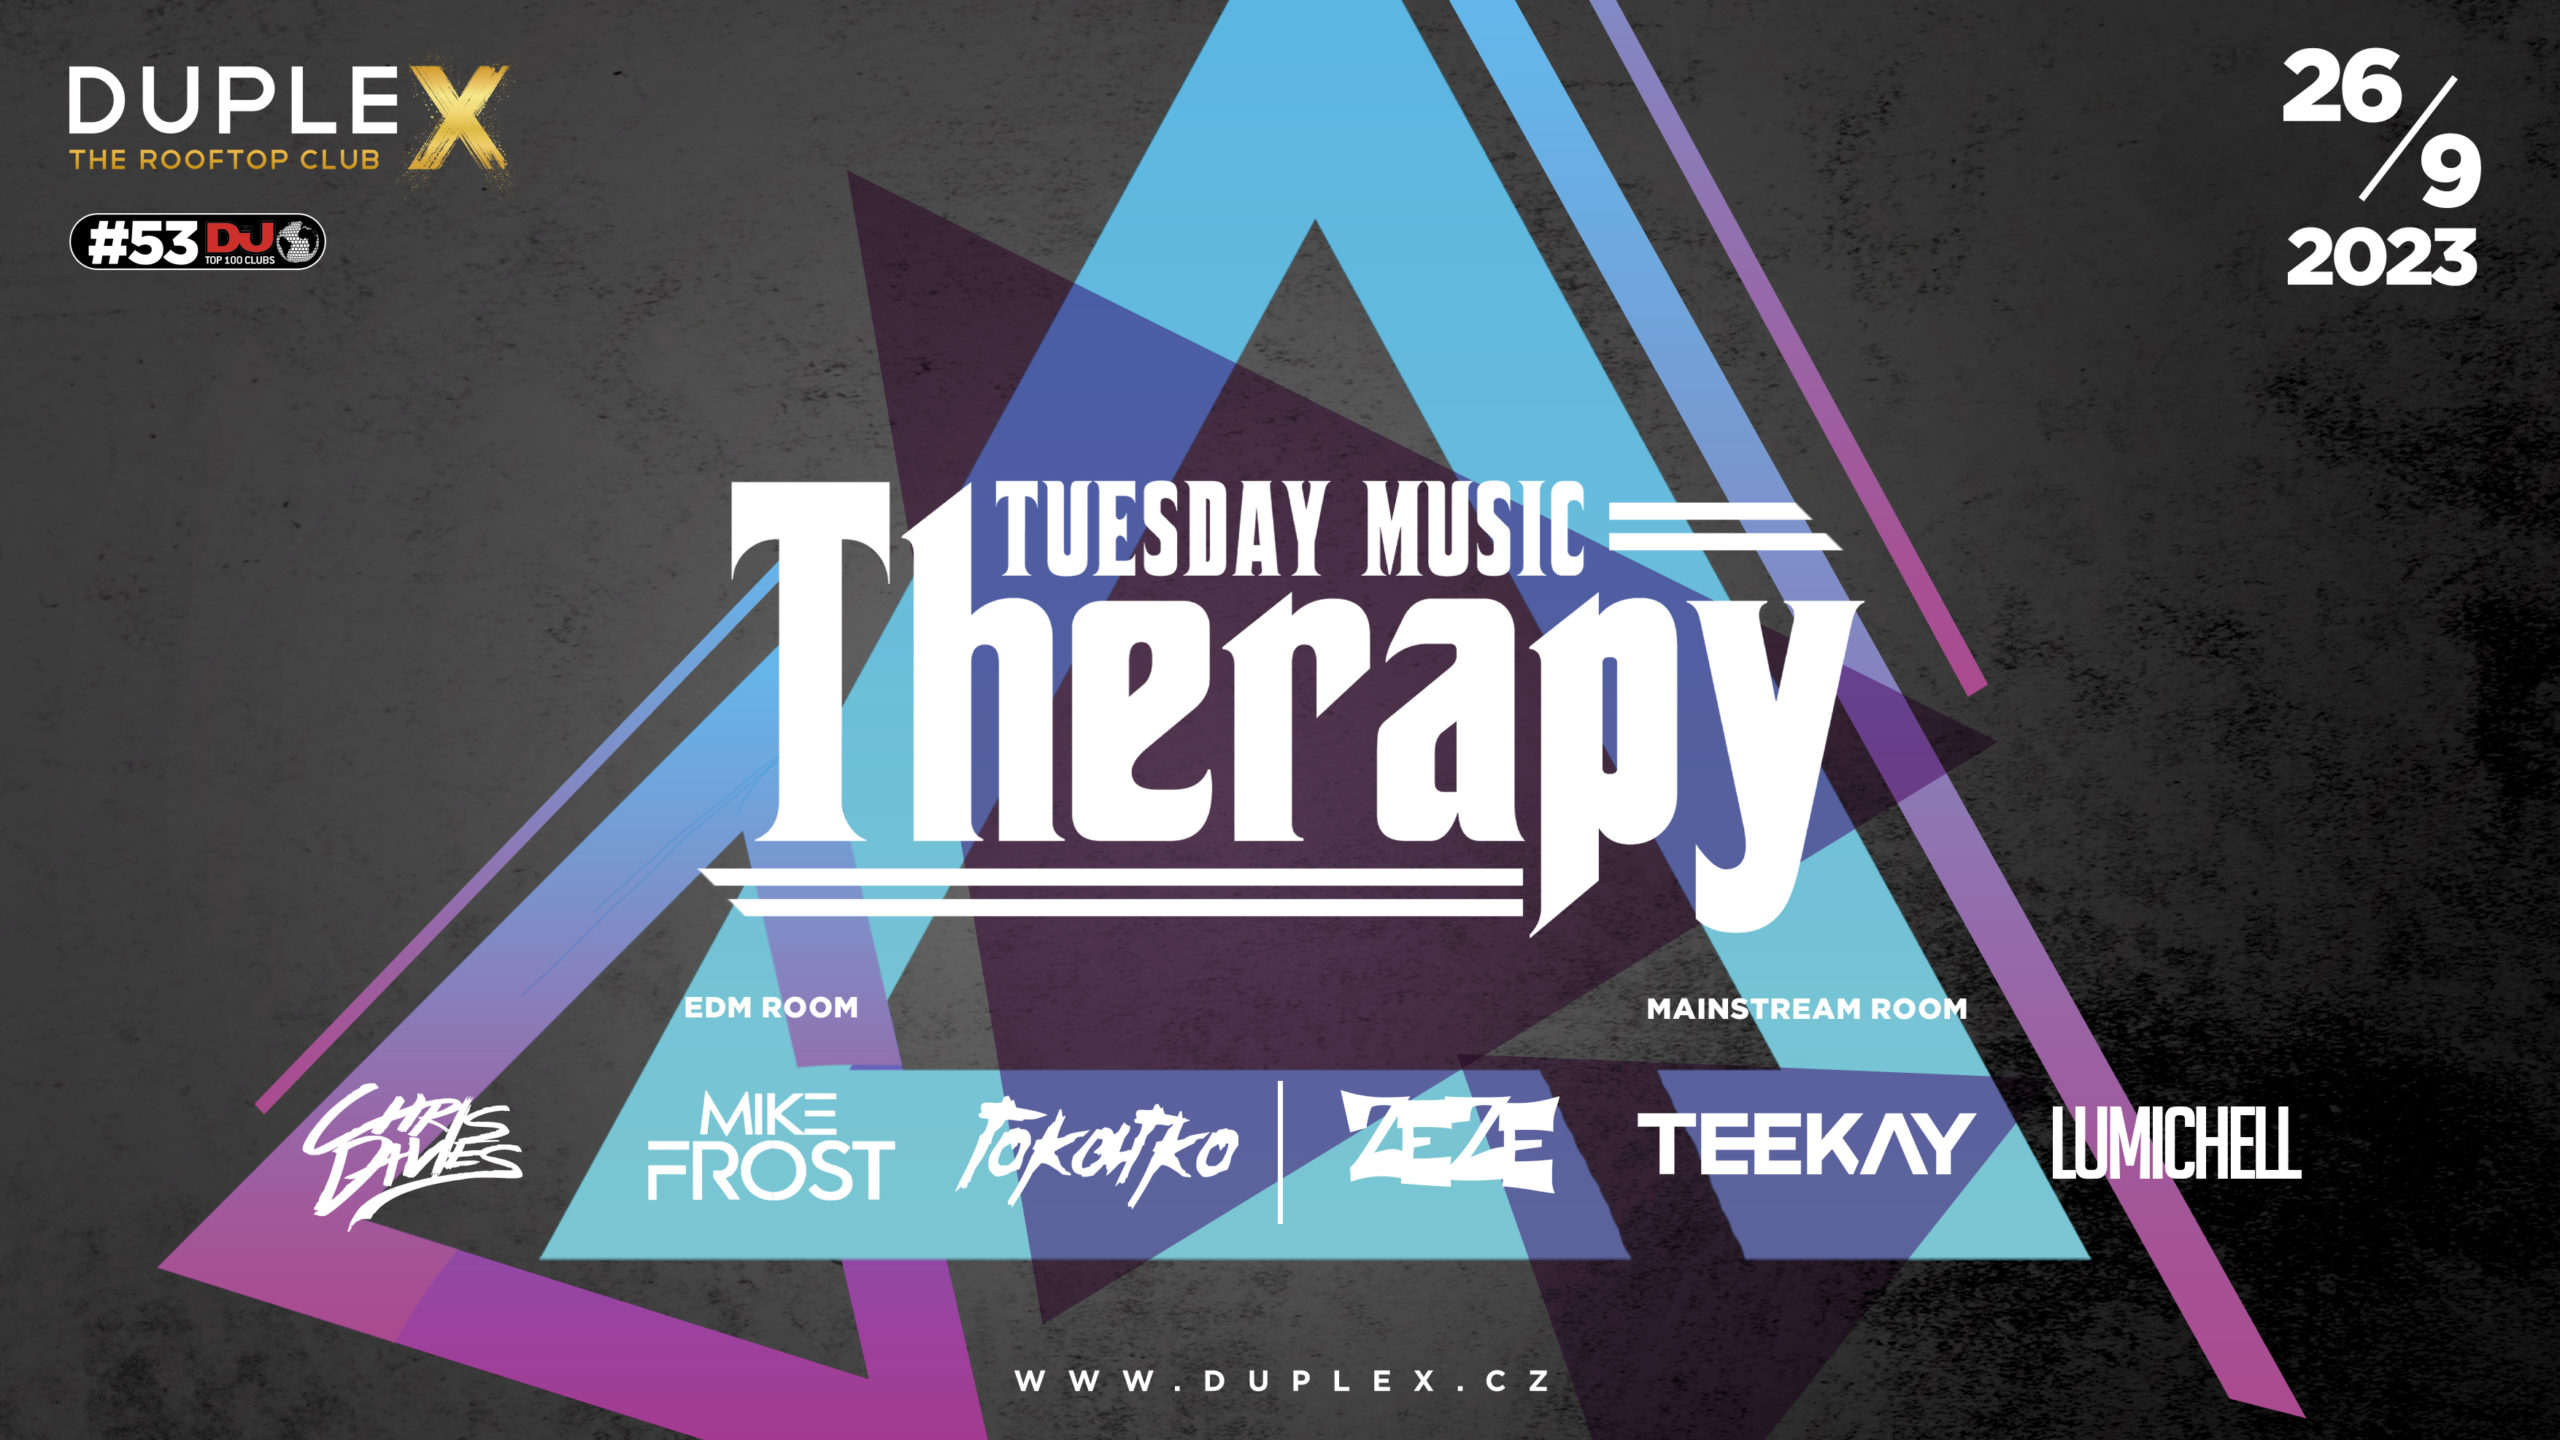 Tuesday Music Therapy - Tuesday Party by DupleX Prague